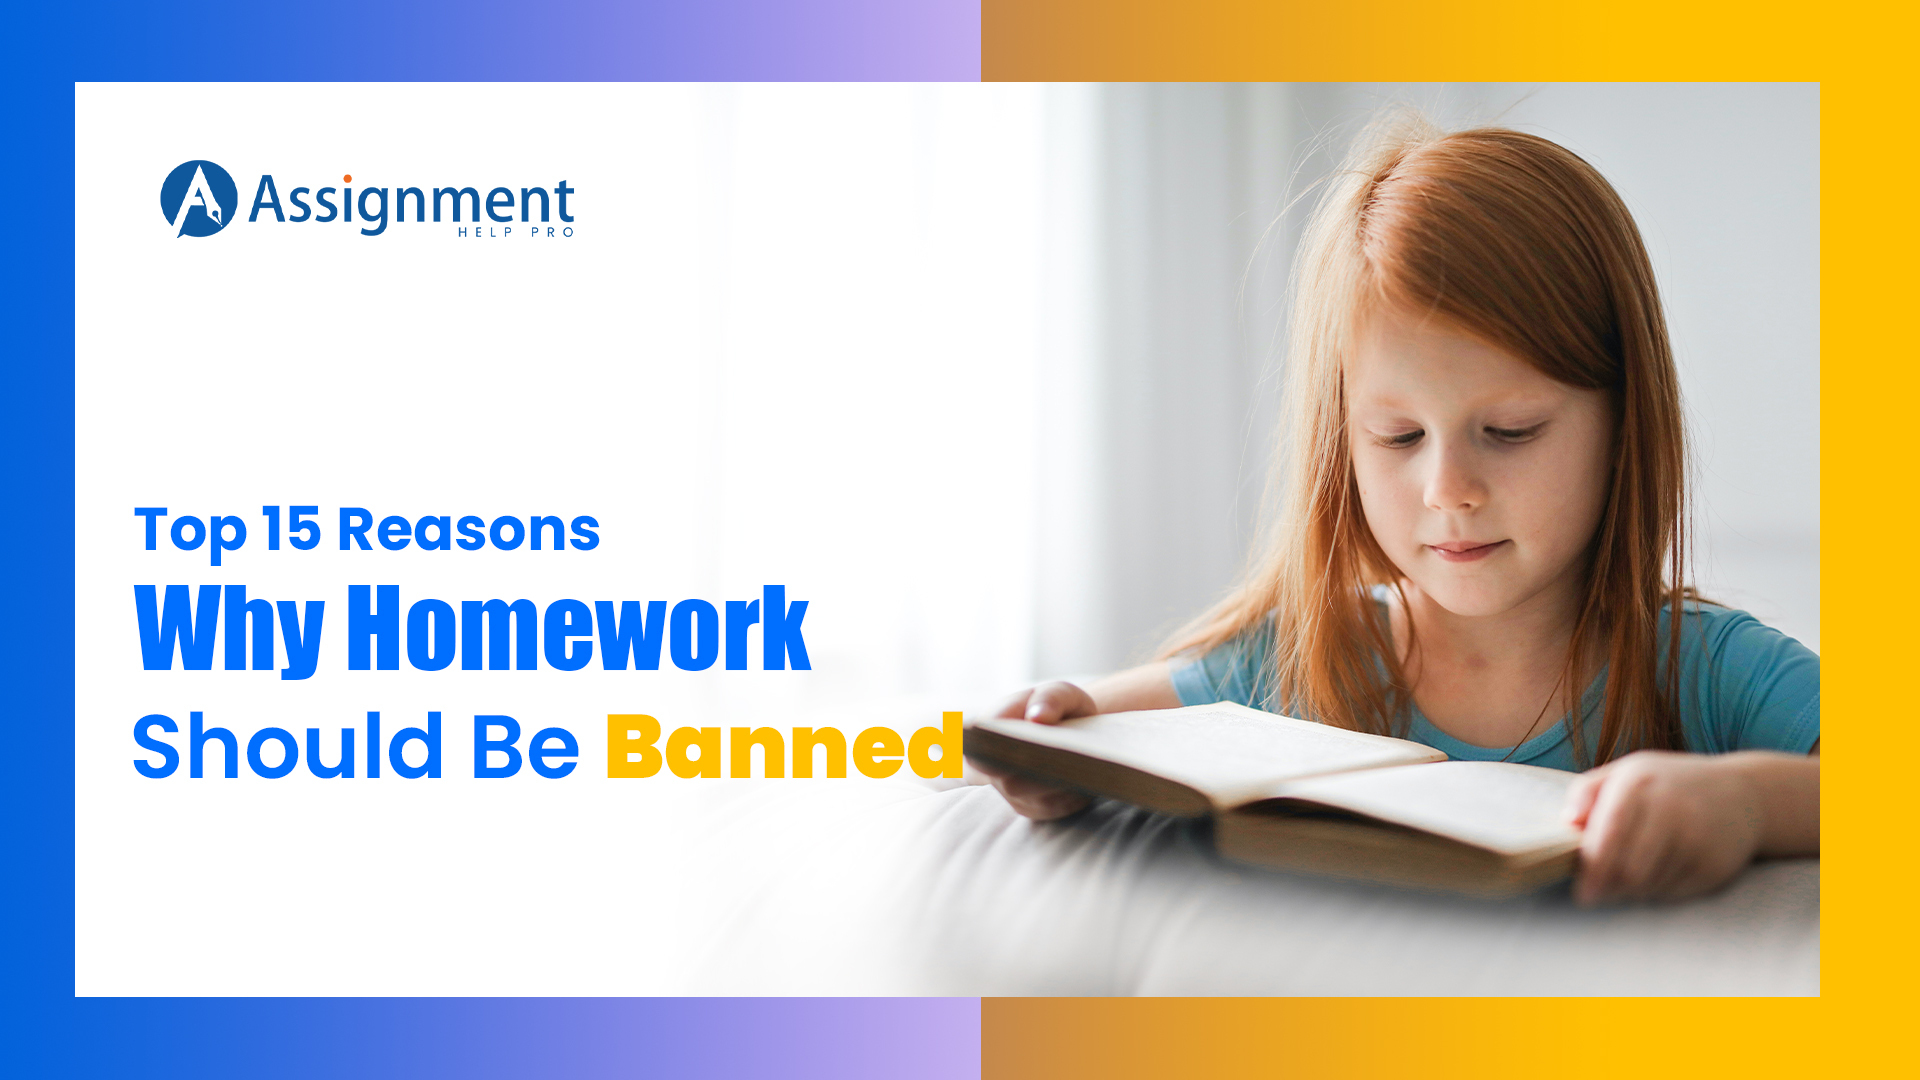 can homework be banned